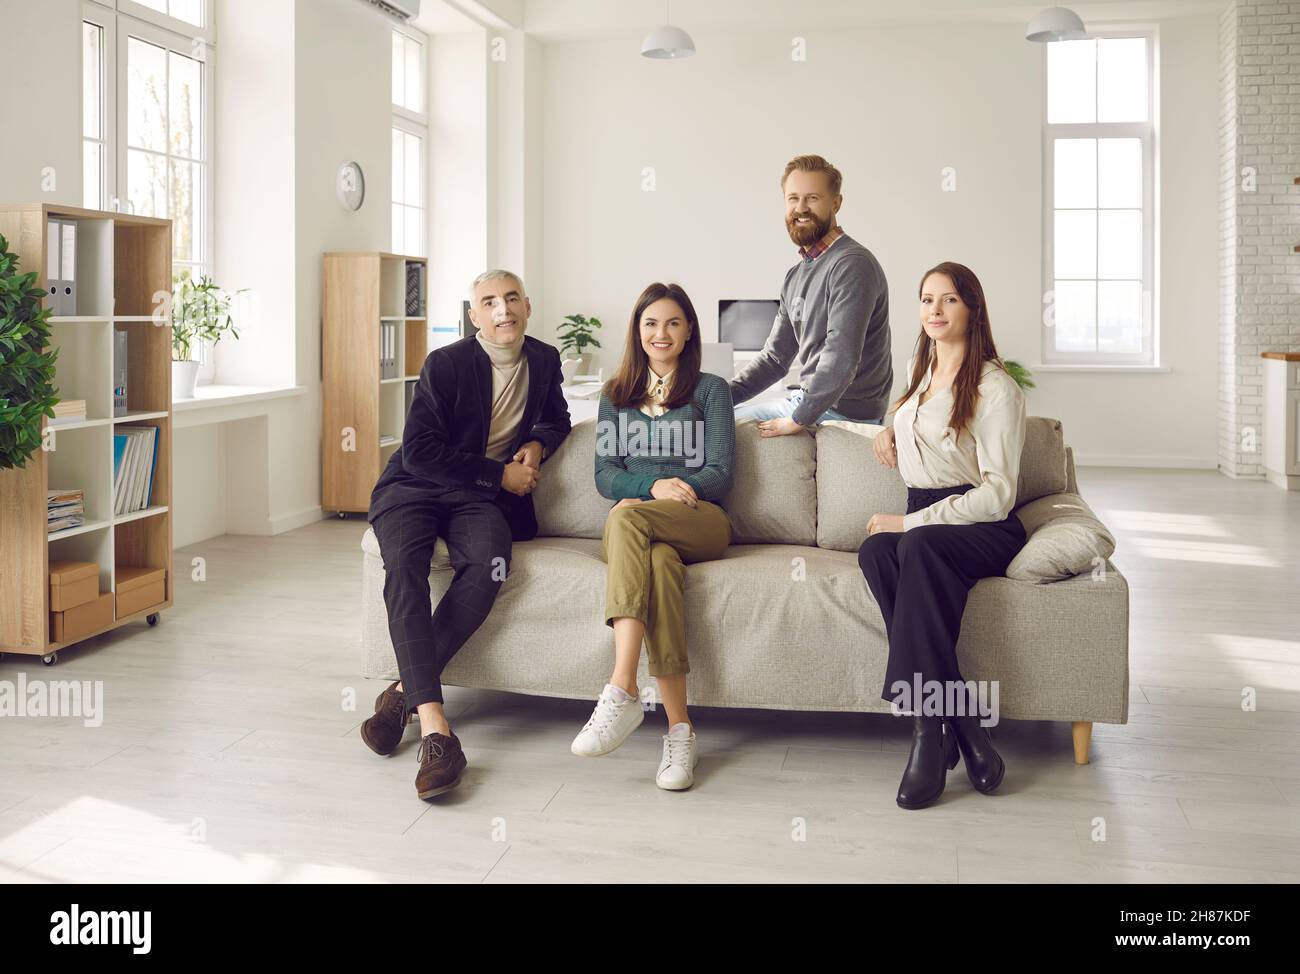 Diverse employees pose together in office Stock Photo